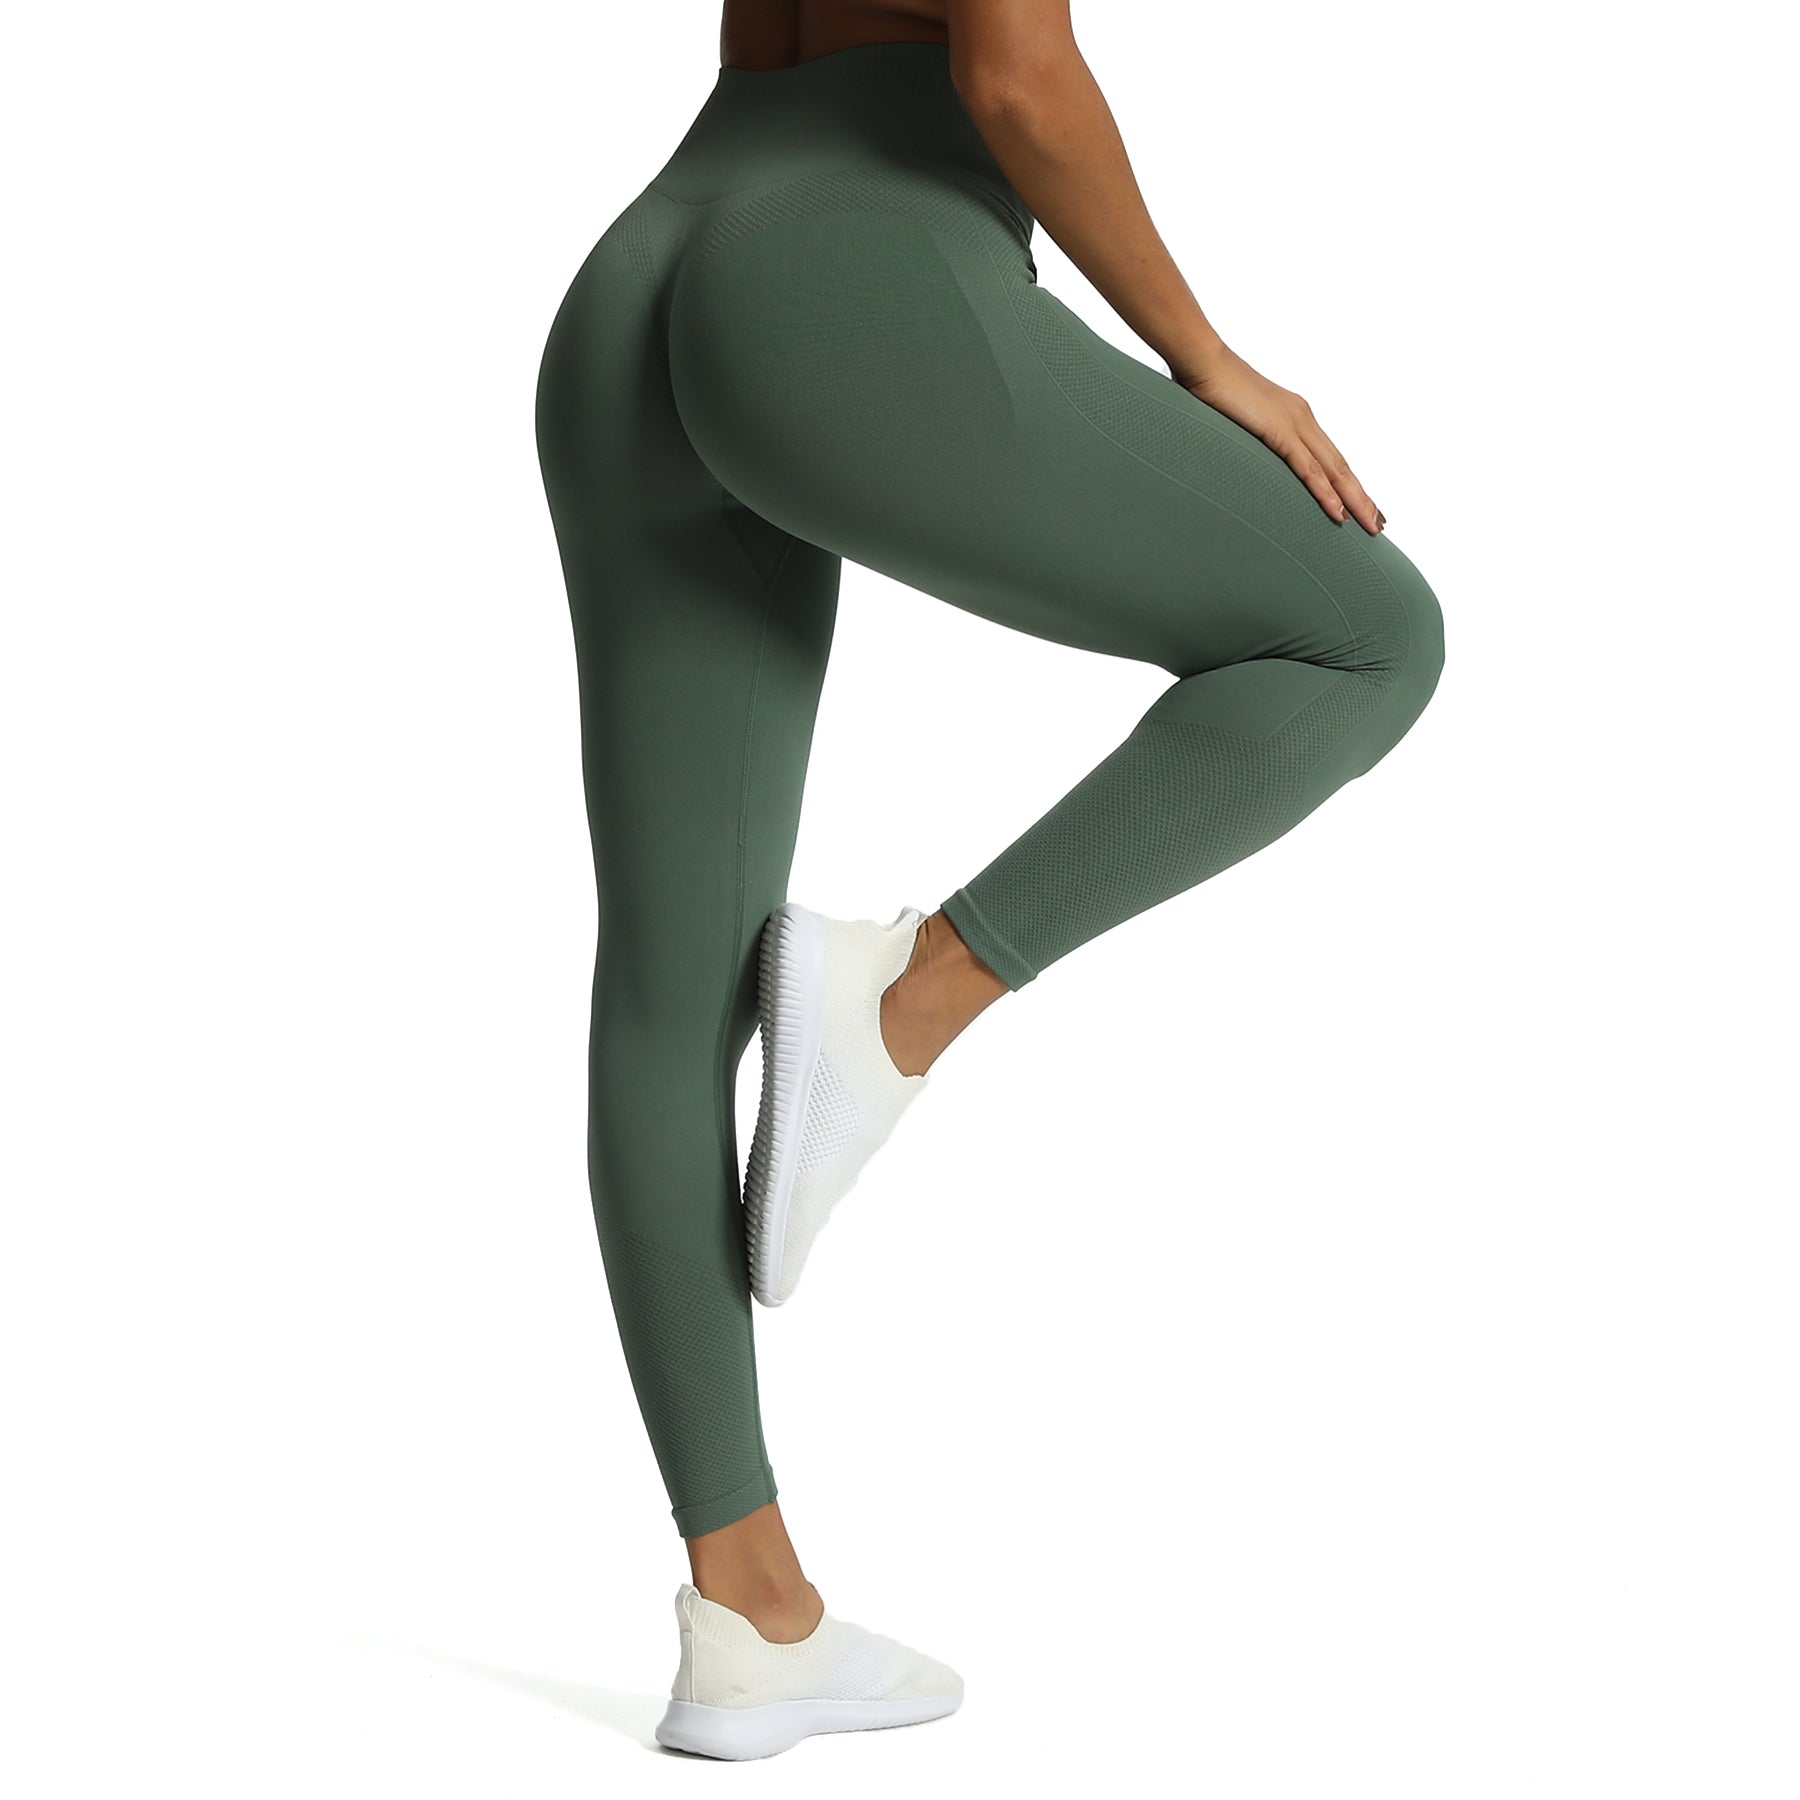  Aoxjox High Waisted Workout Leggings For Women